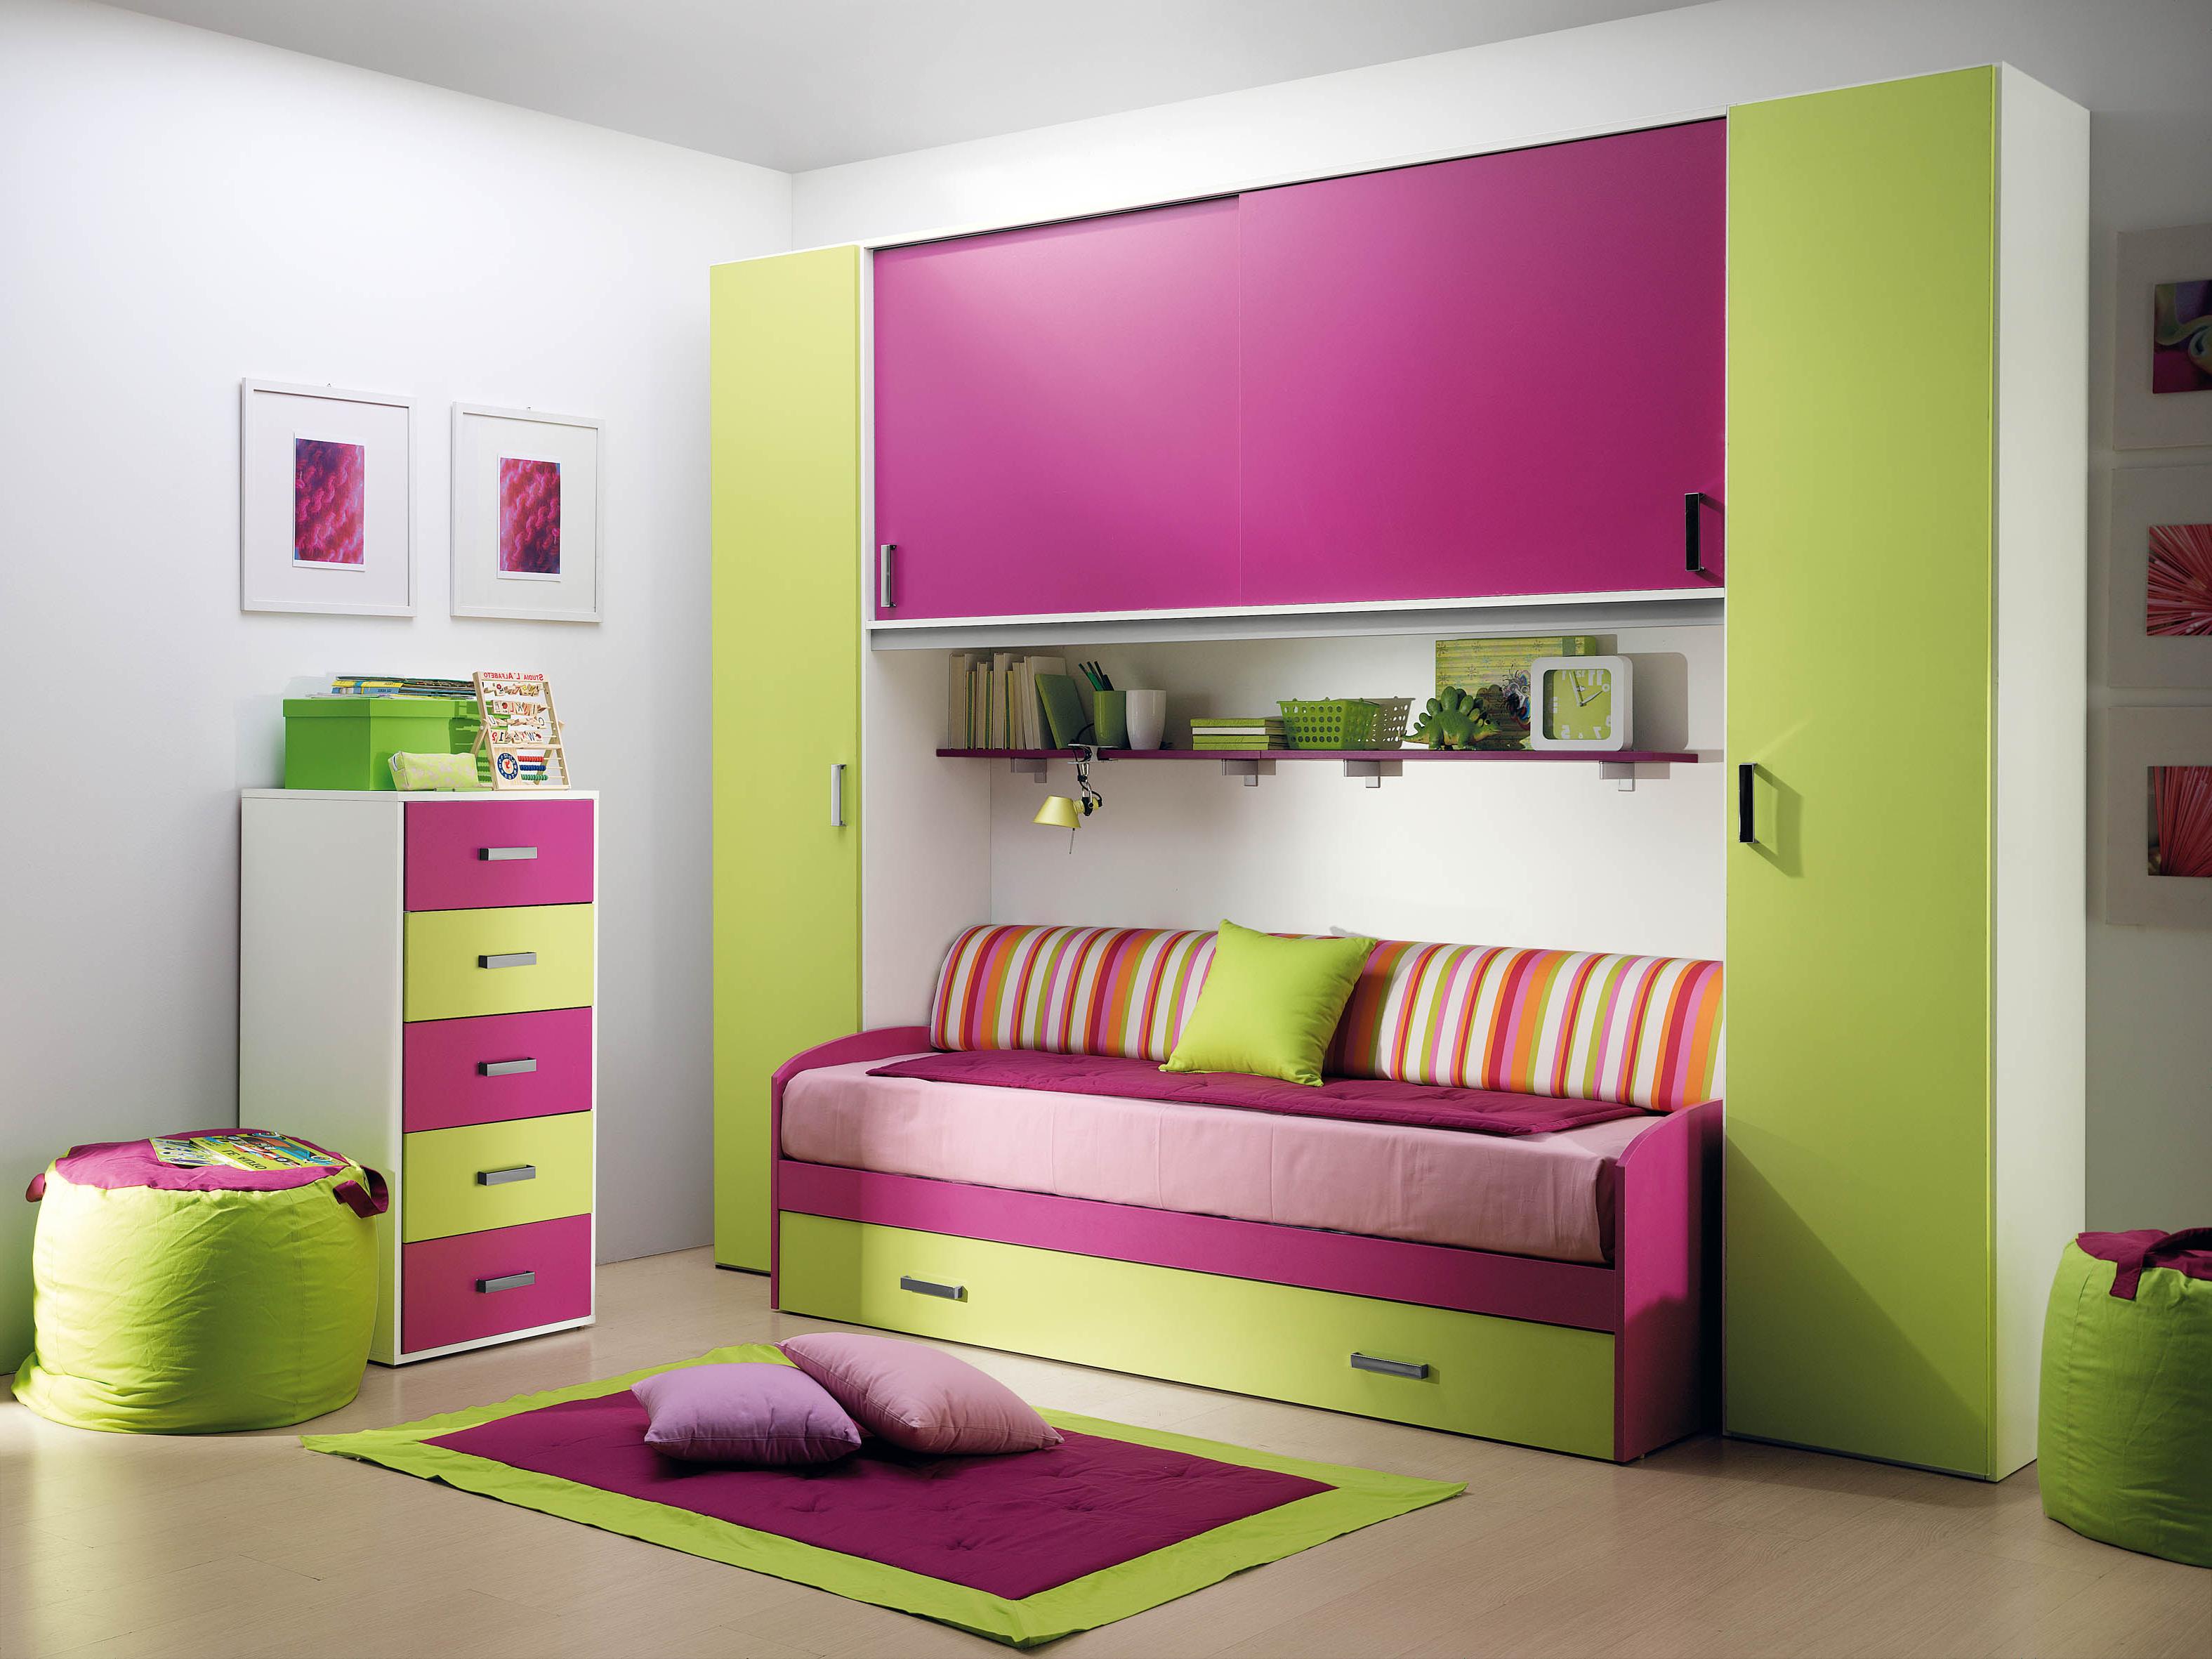 childrens bedroom furniture for small rooms kids bedroom furniture with desk desk childrens bedroom furniture kids bed ADZAMUO